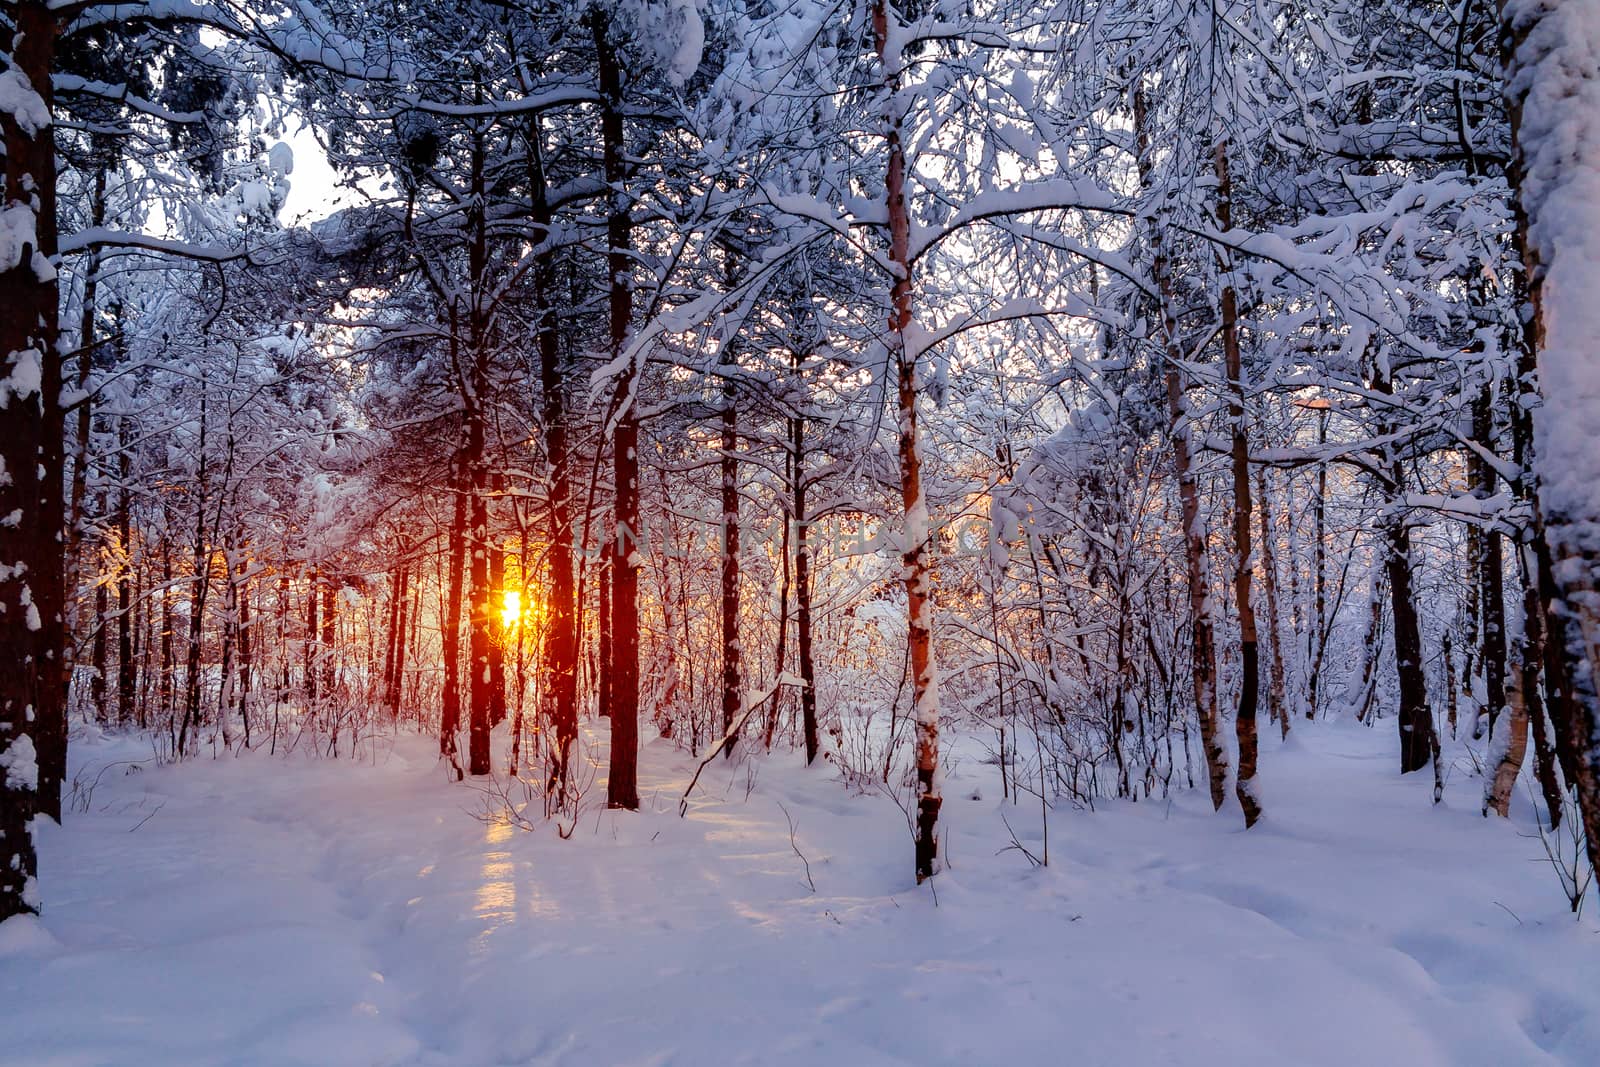 Beautiful sunset in the winter snowy forest. Sun's rays make their way through the trees by galsand